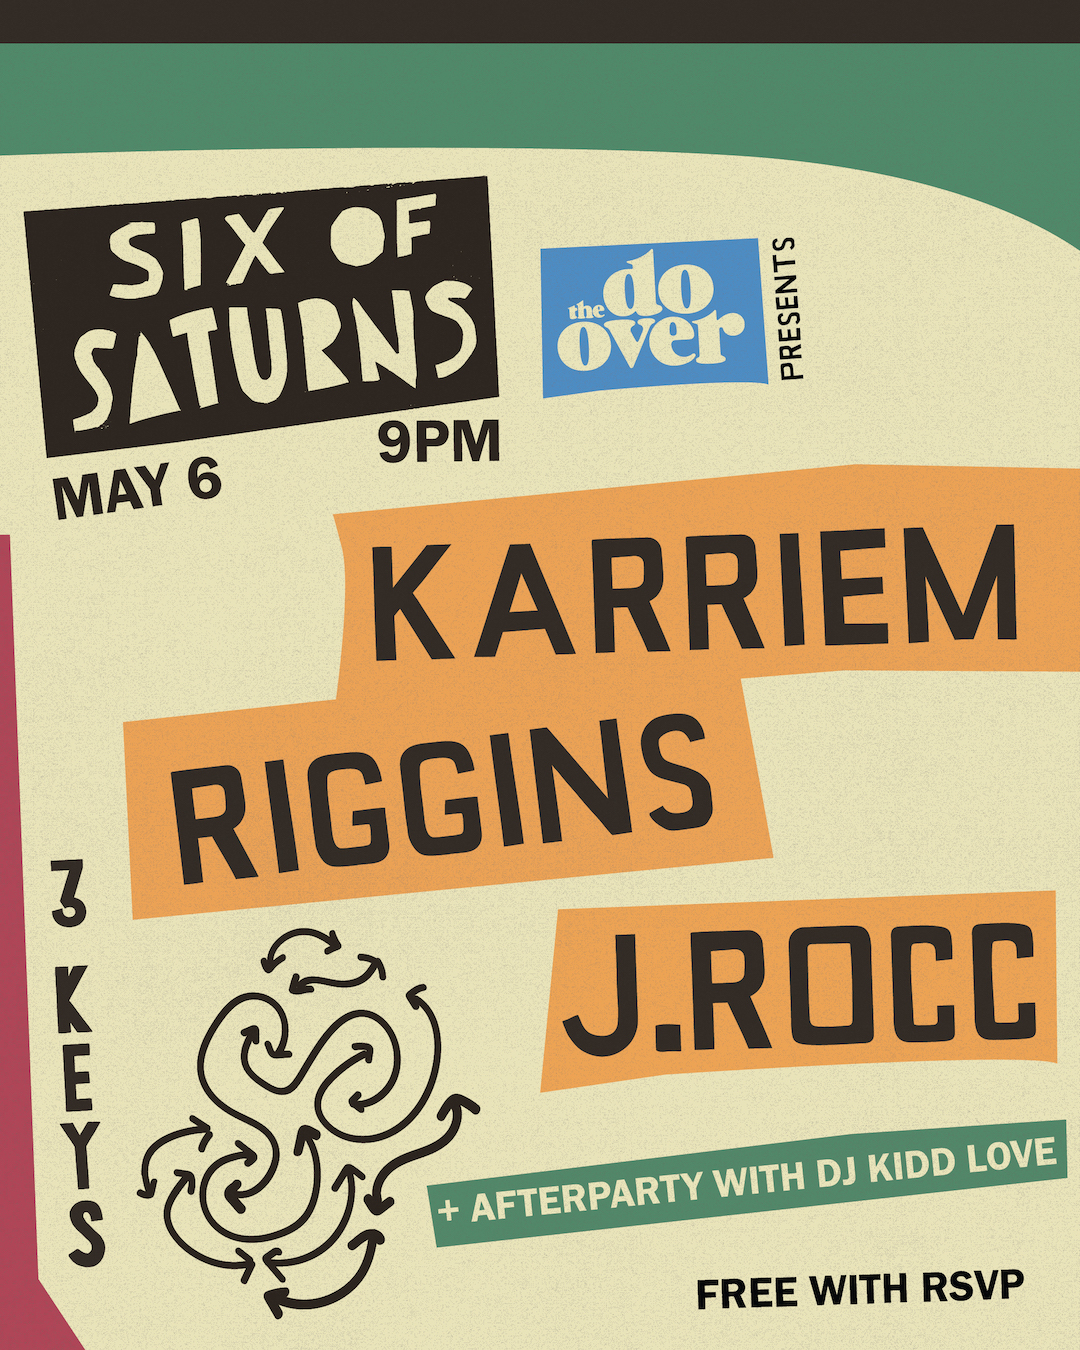 Six of Saturns: The Do-Over Presents Karriem Riggins x J.Rocc promo